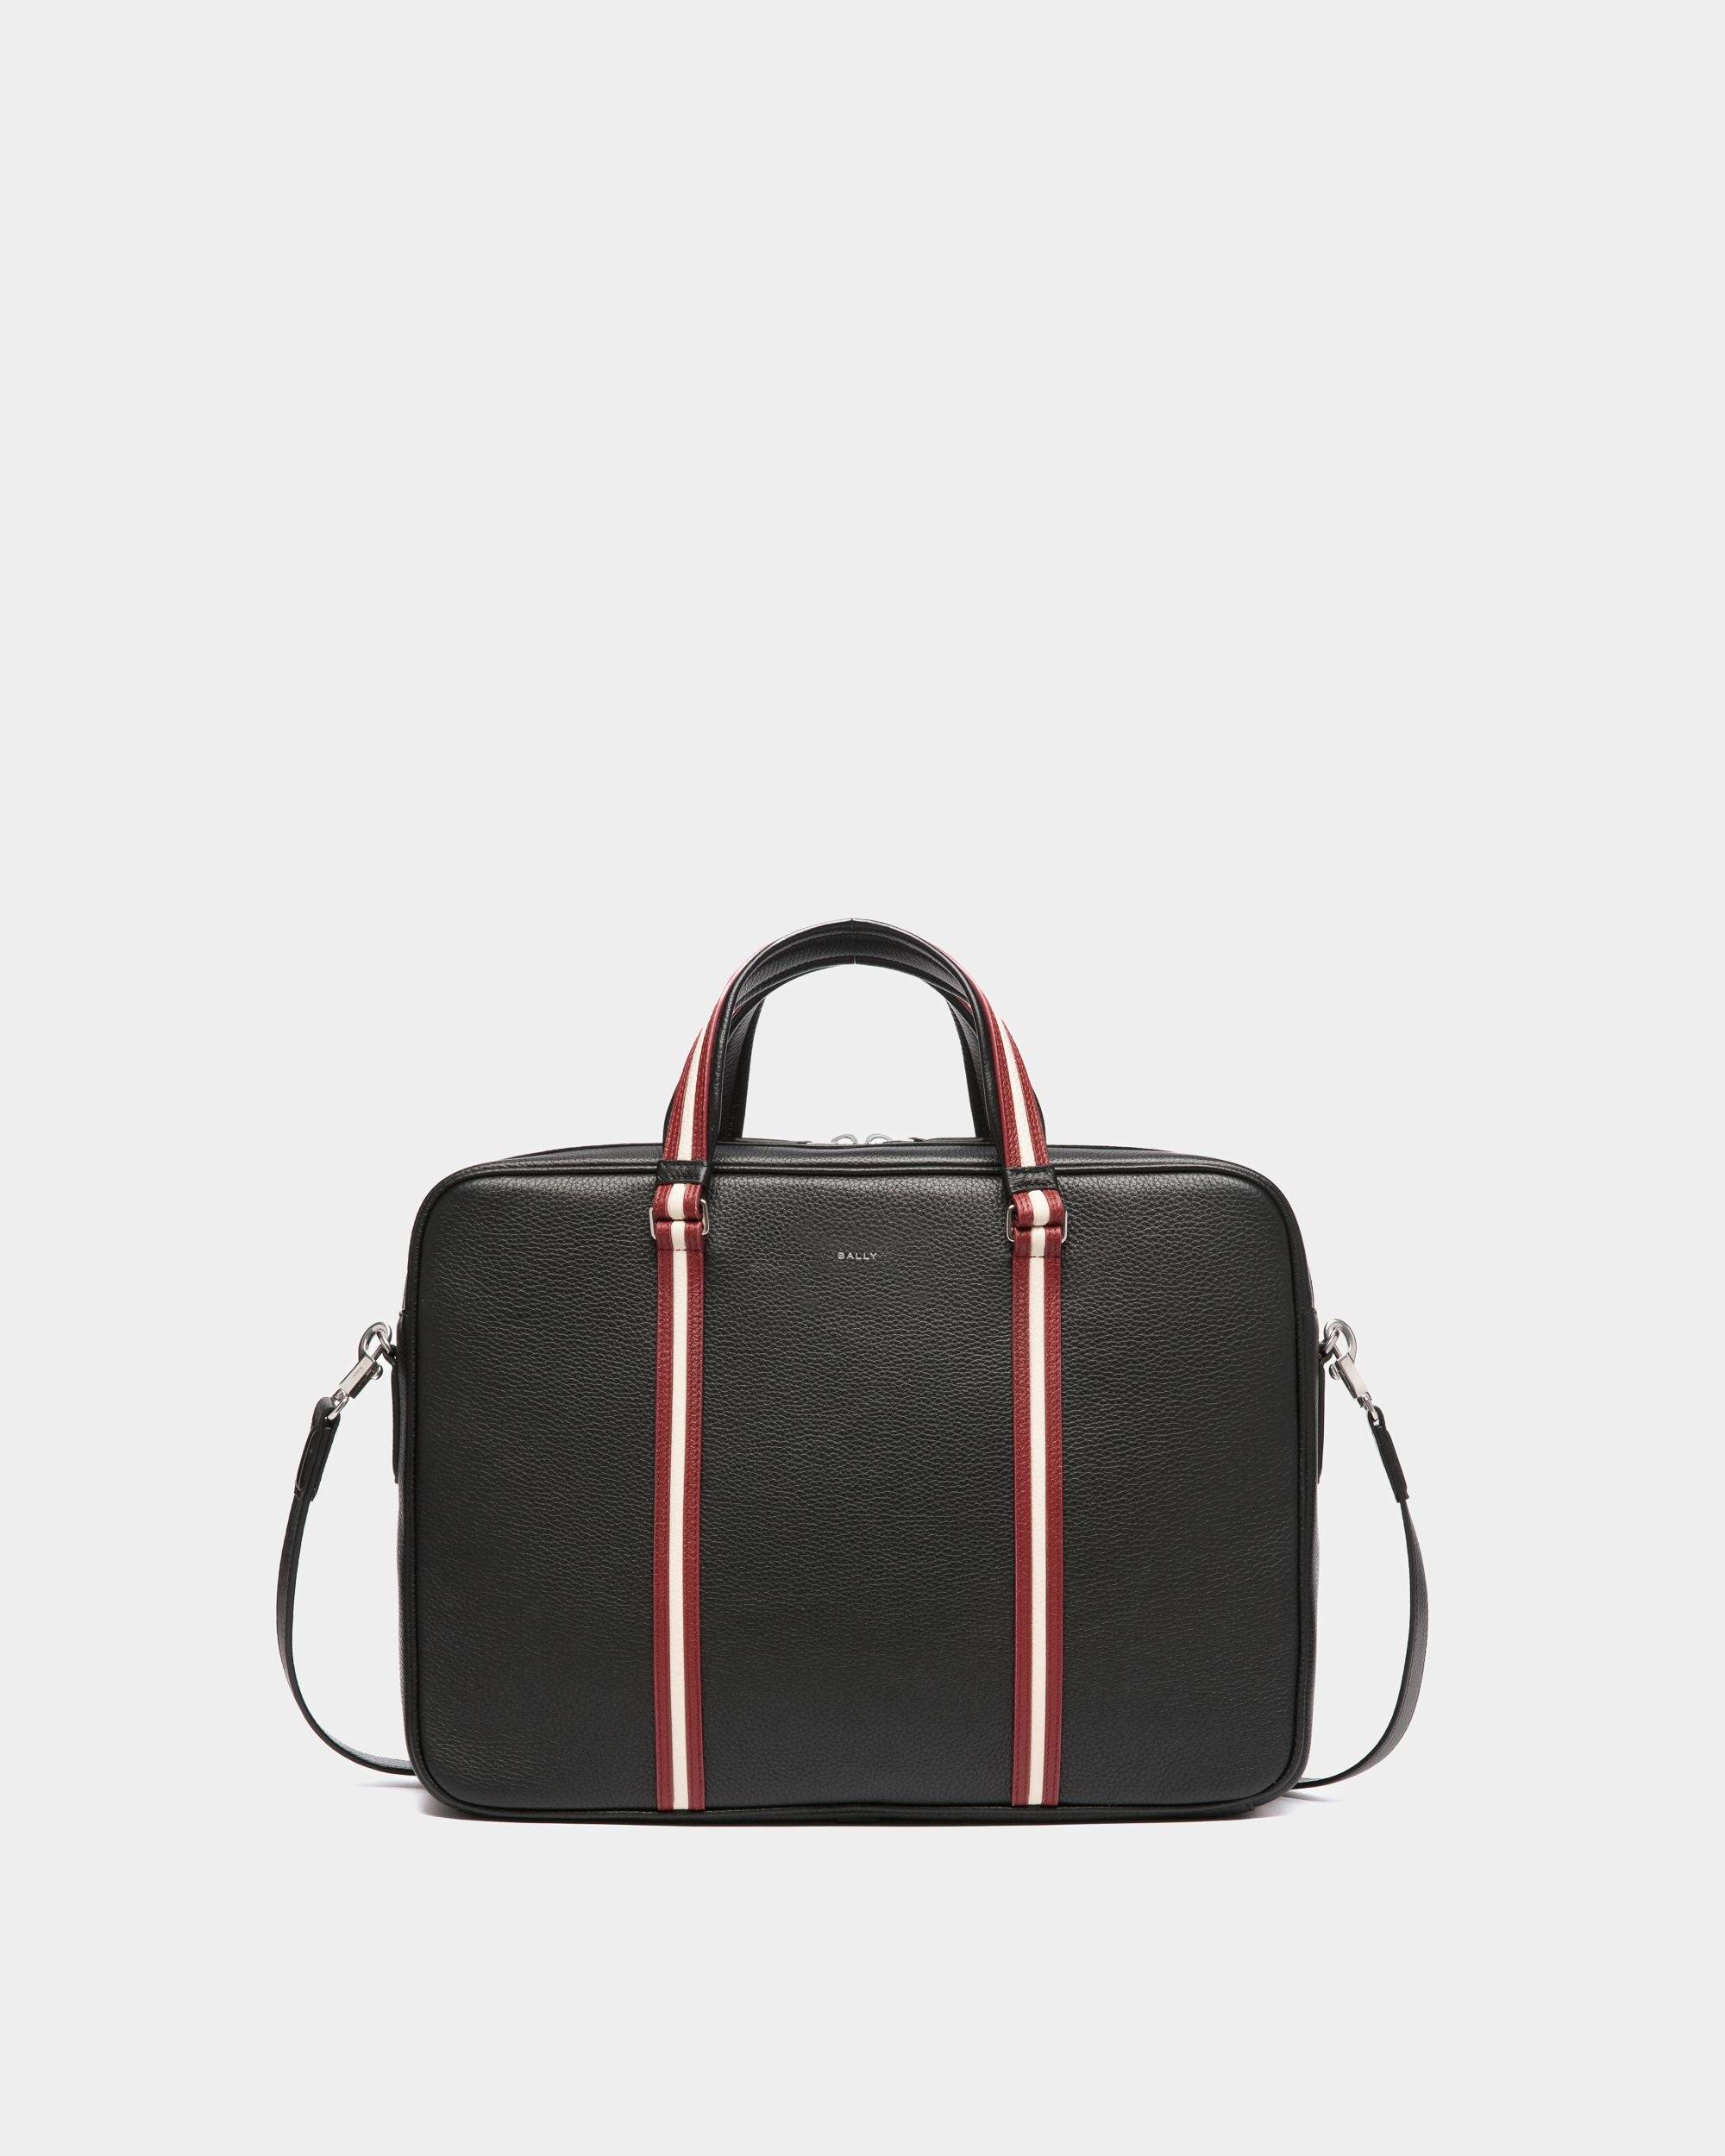 Men's Code Briefcase In Black Grained Leather | Bally | Still Life Front